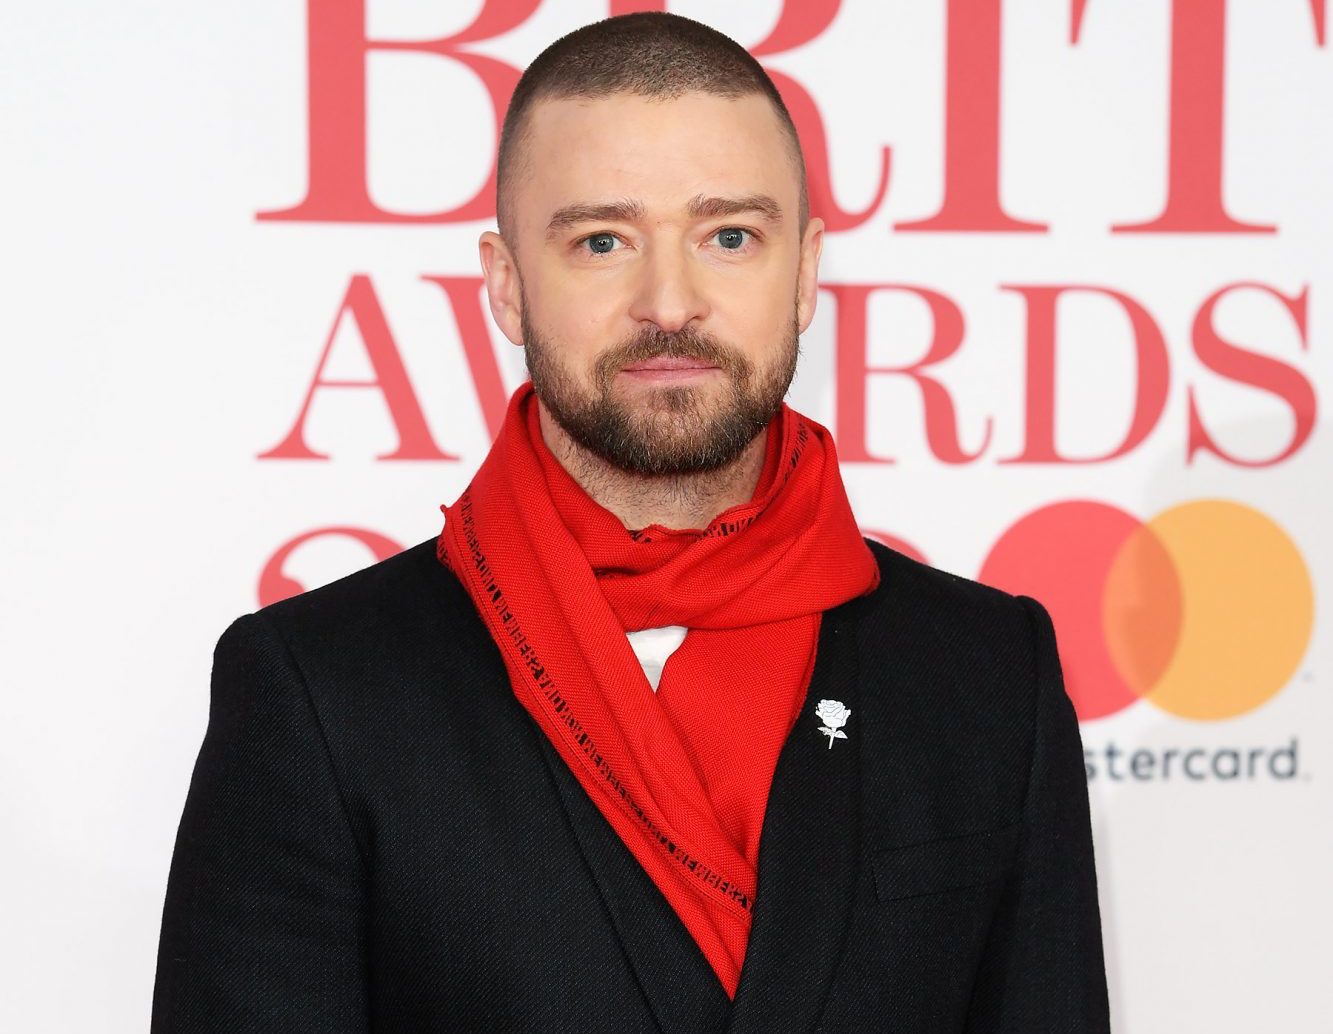 Justin Timberlake Sells His Music Catalog in Deal Worth a Reported $100 Million